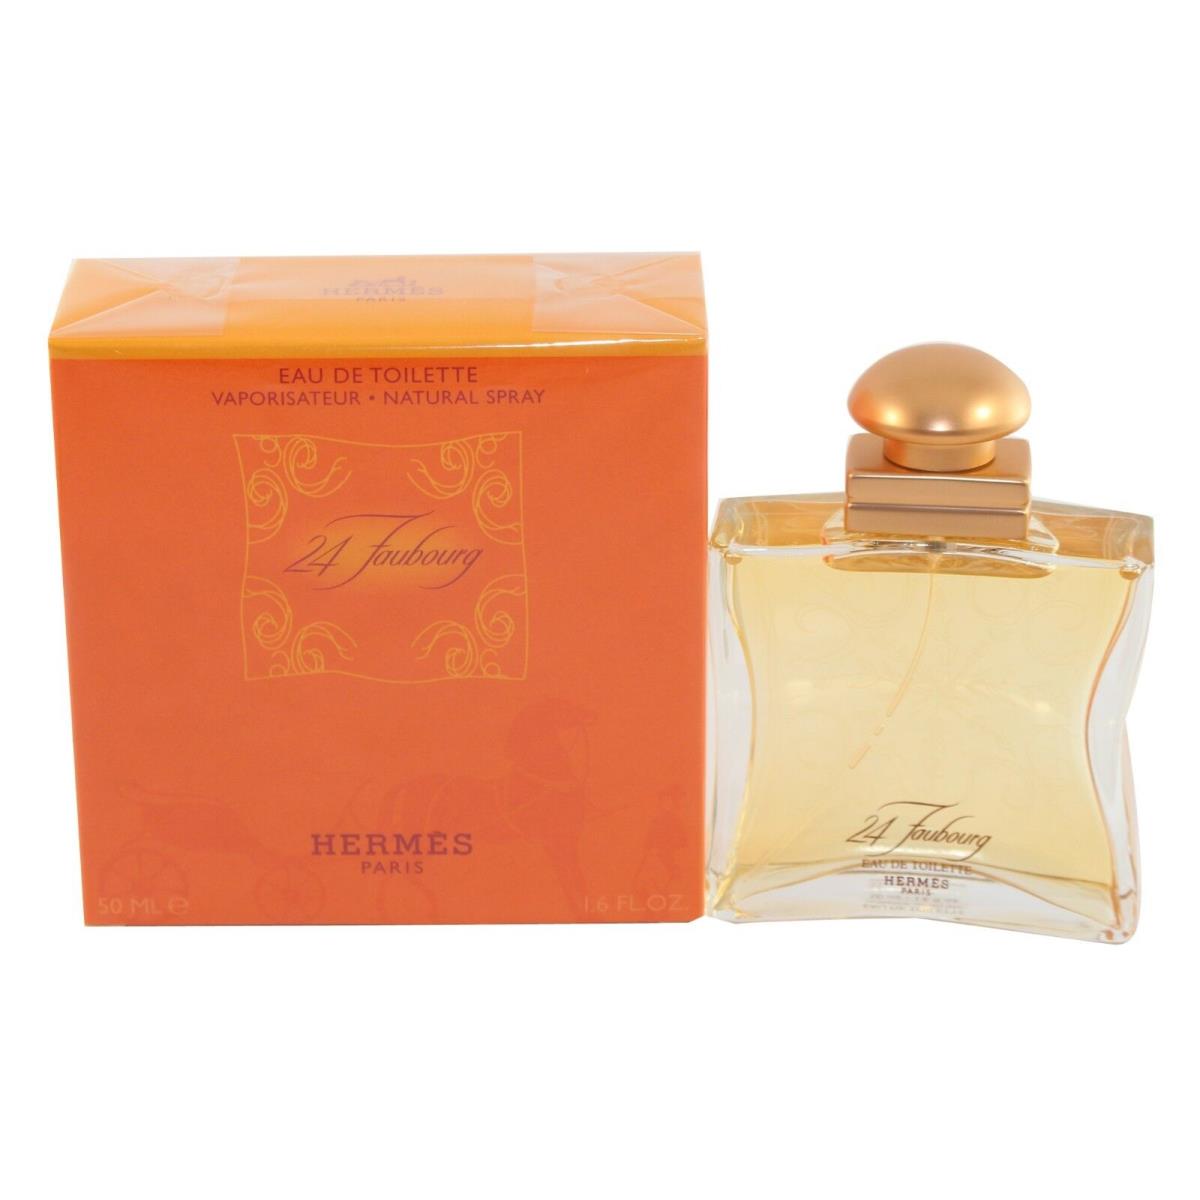 24 Faubourg BY Hermes 1.6/1.7 OZ Edt Spray For Women